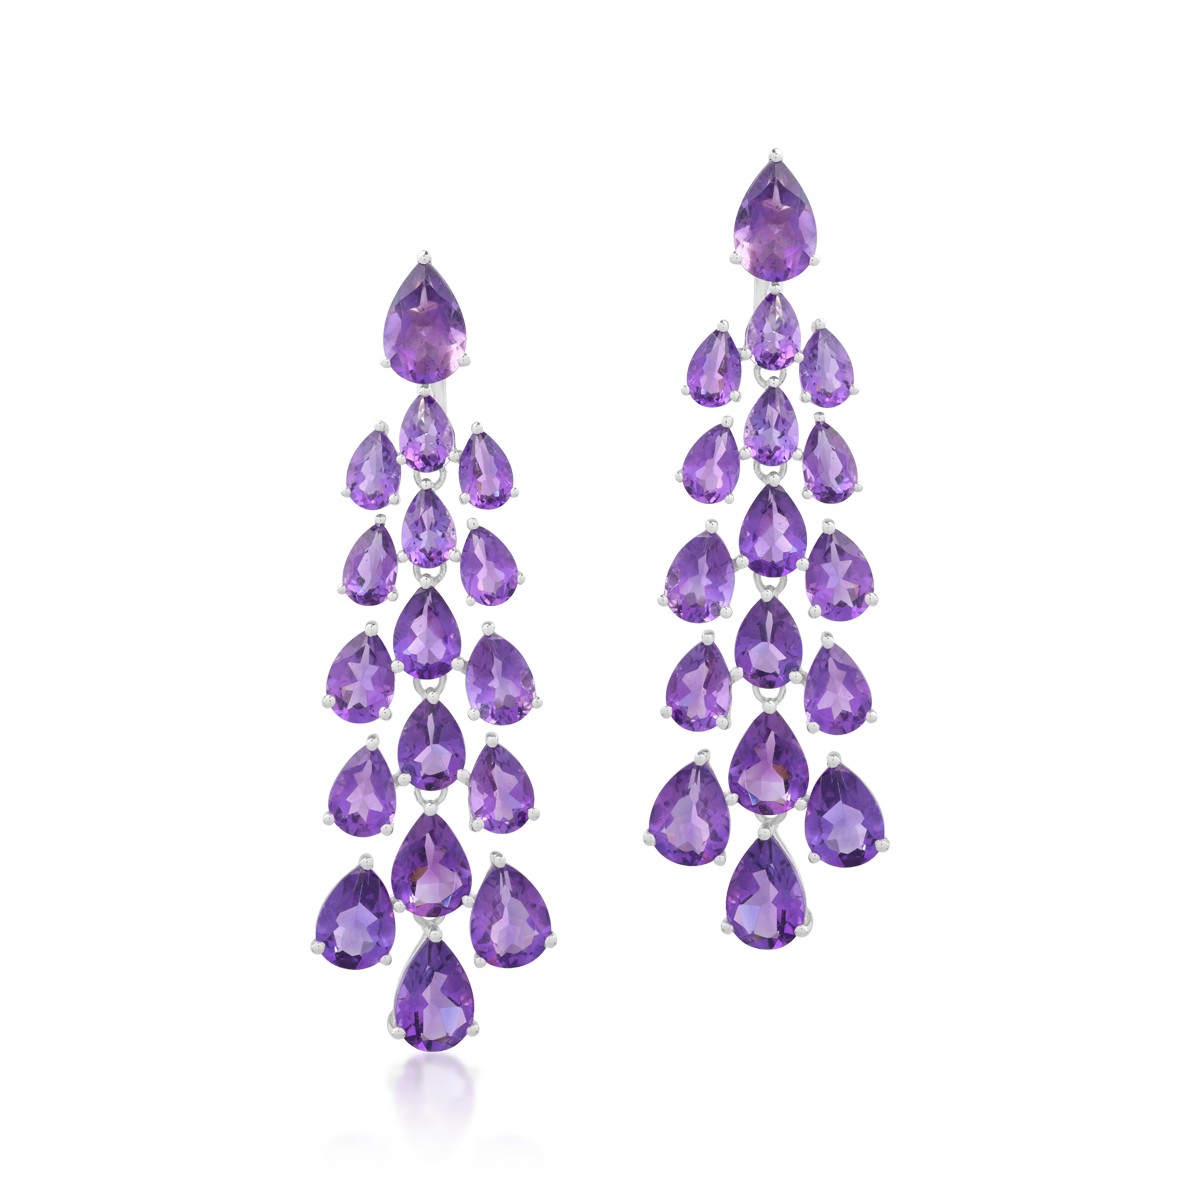 14K white gold earrings with amethysts 24.04ct